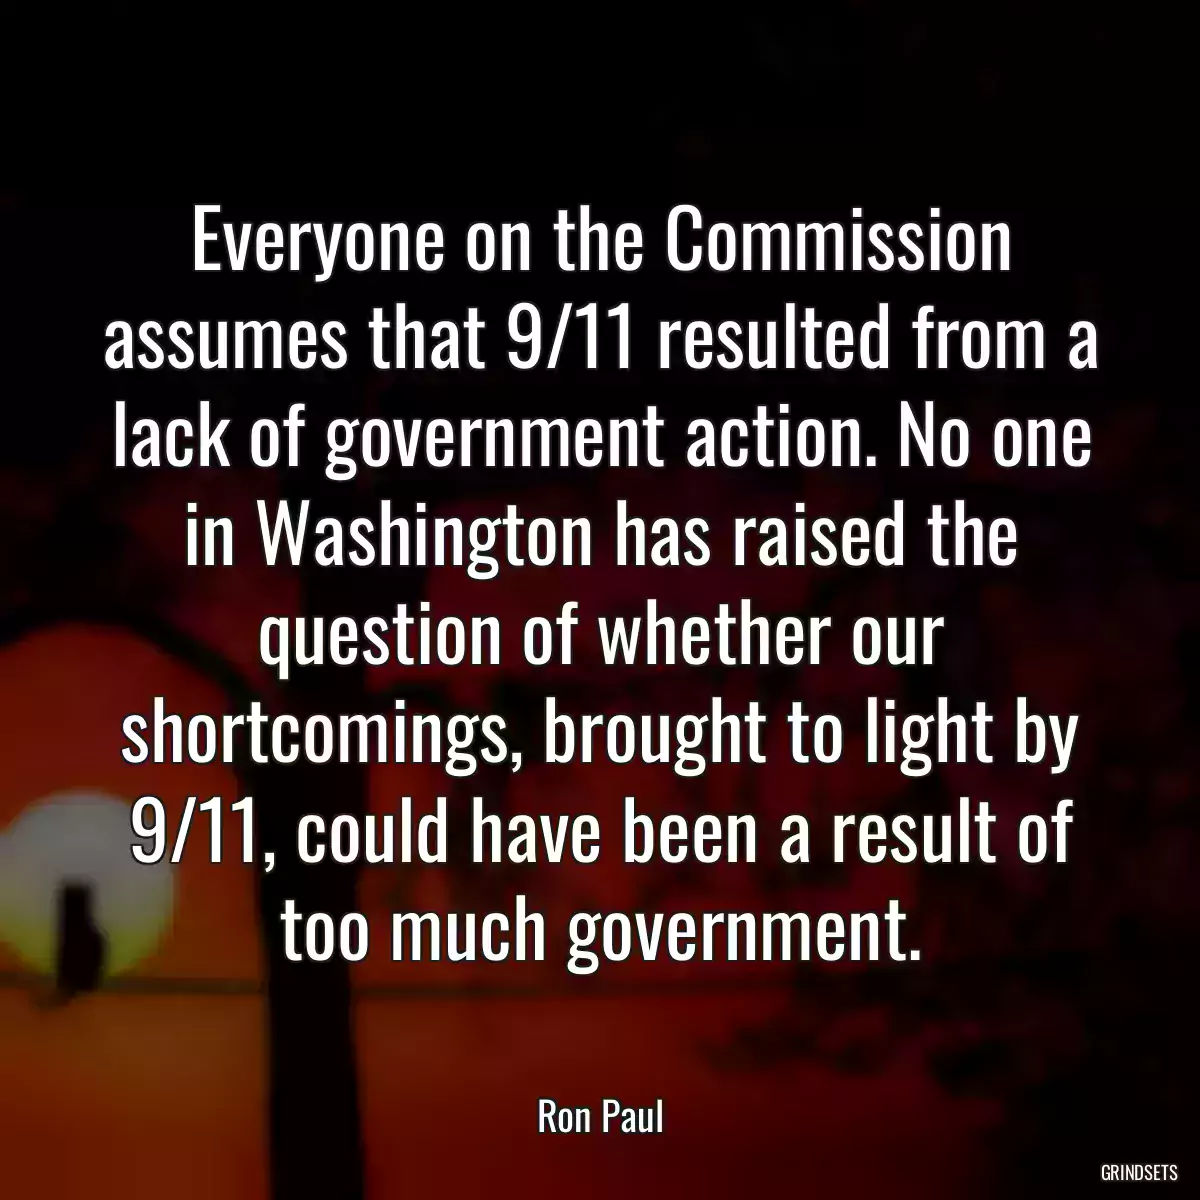 Everyone on the Commission assumes that 9/11 resulted from a lack of government action. No one in Washington has raised the question of whether our shortcomings, brought to light by 9/11, could have been a result of too much government.